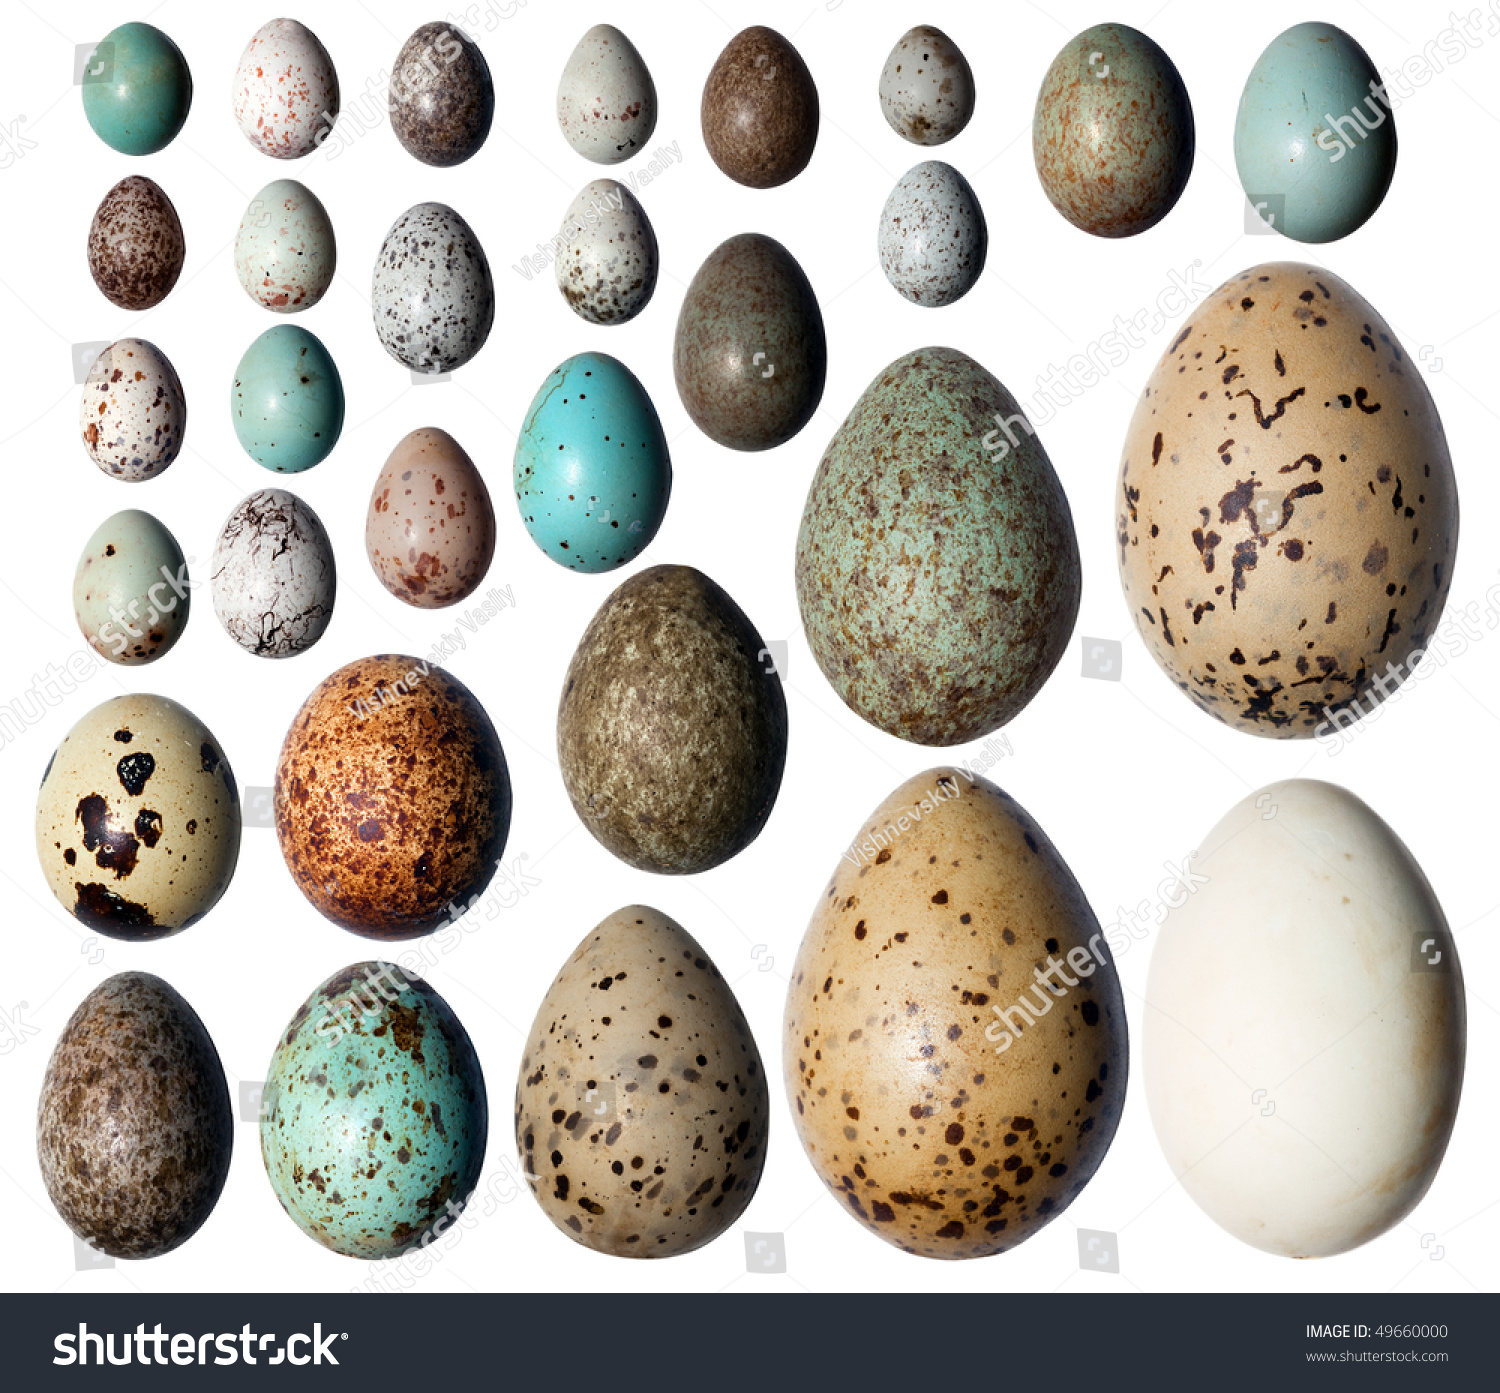 Eggs of birds in front of white background. #49660000